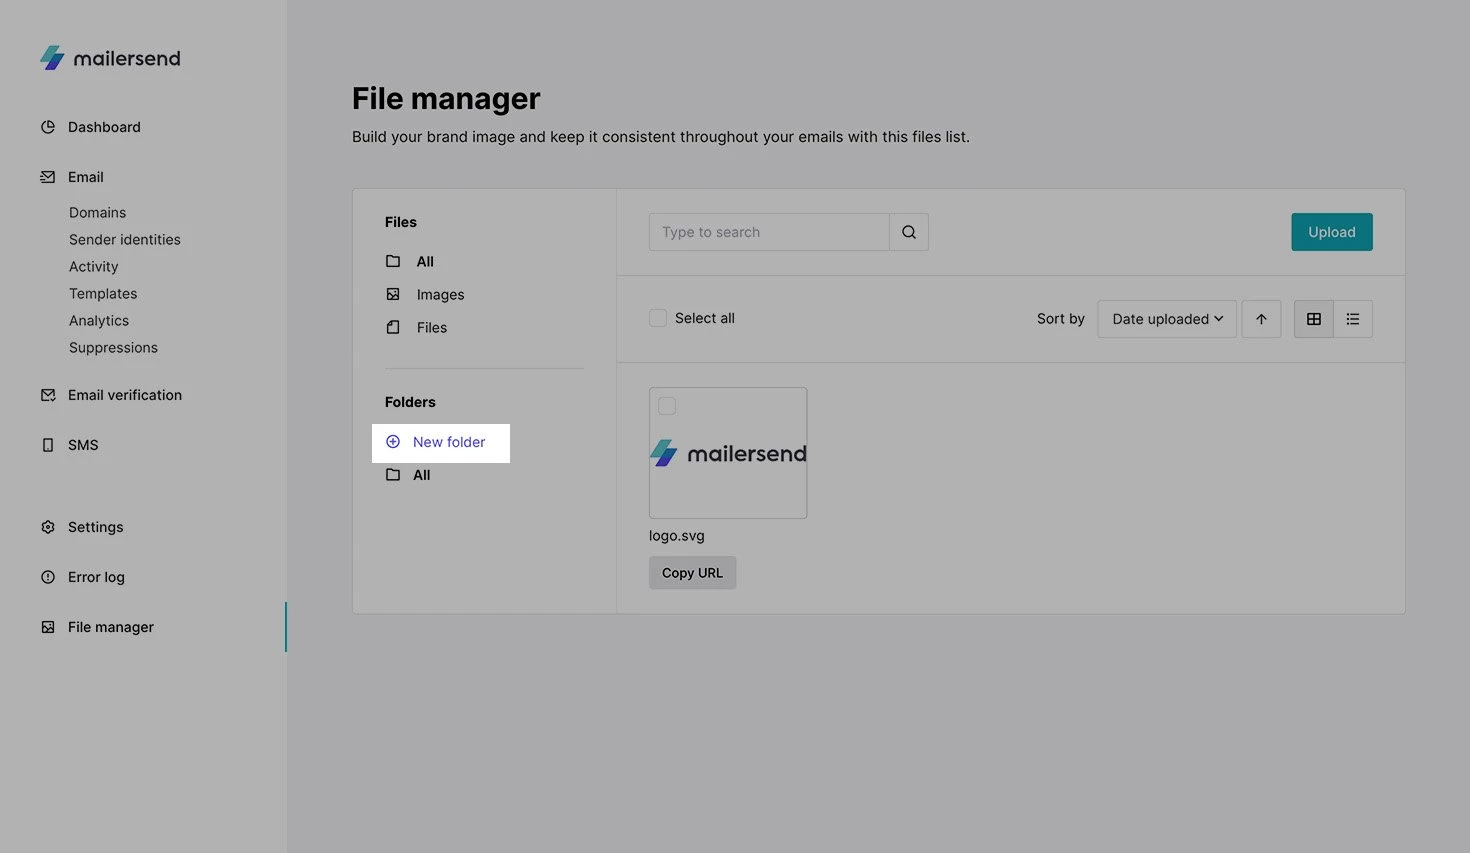 Creating a new folder in the file manager.